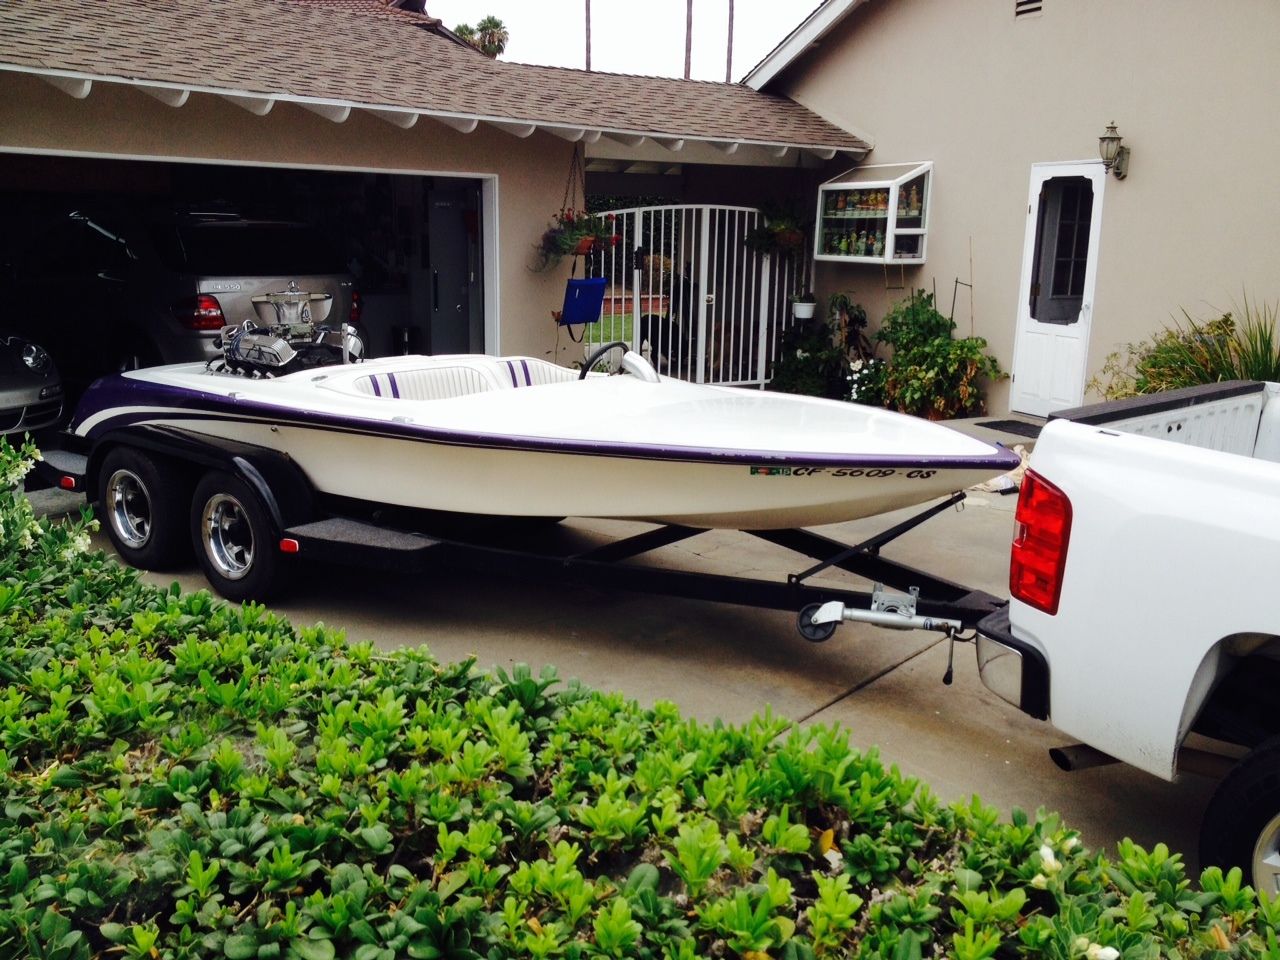 Gaylord V-Drive Flatbottom boat for sale from USA